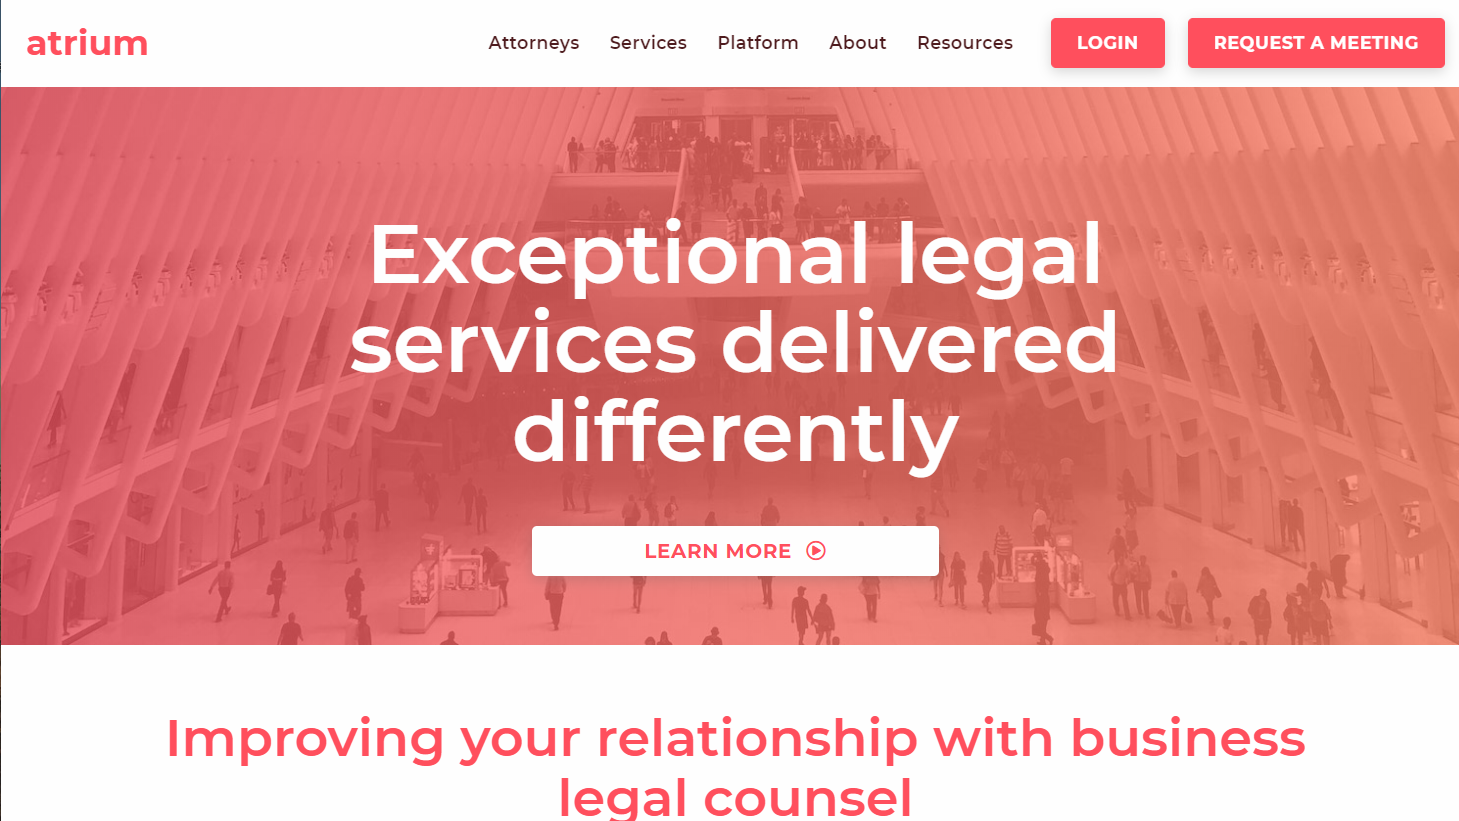 Atrium Founder Confirms Layoffs of Legal Staff; Will Focus on Building Services Network for Startups